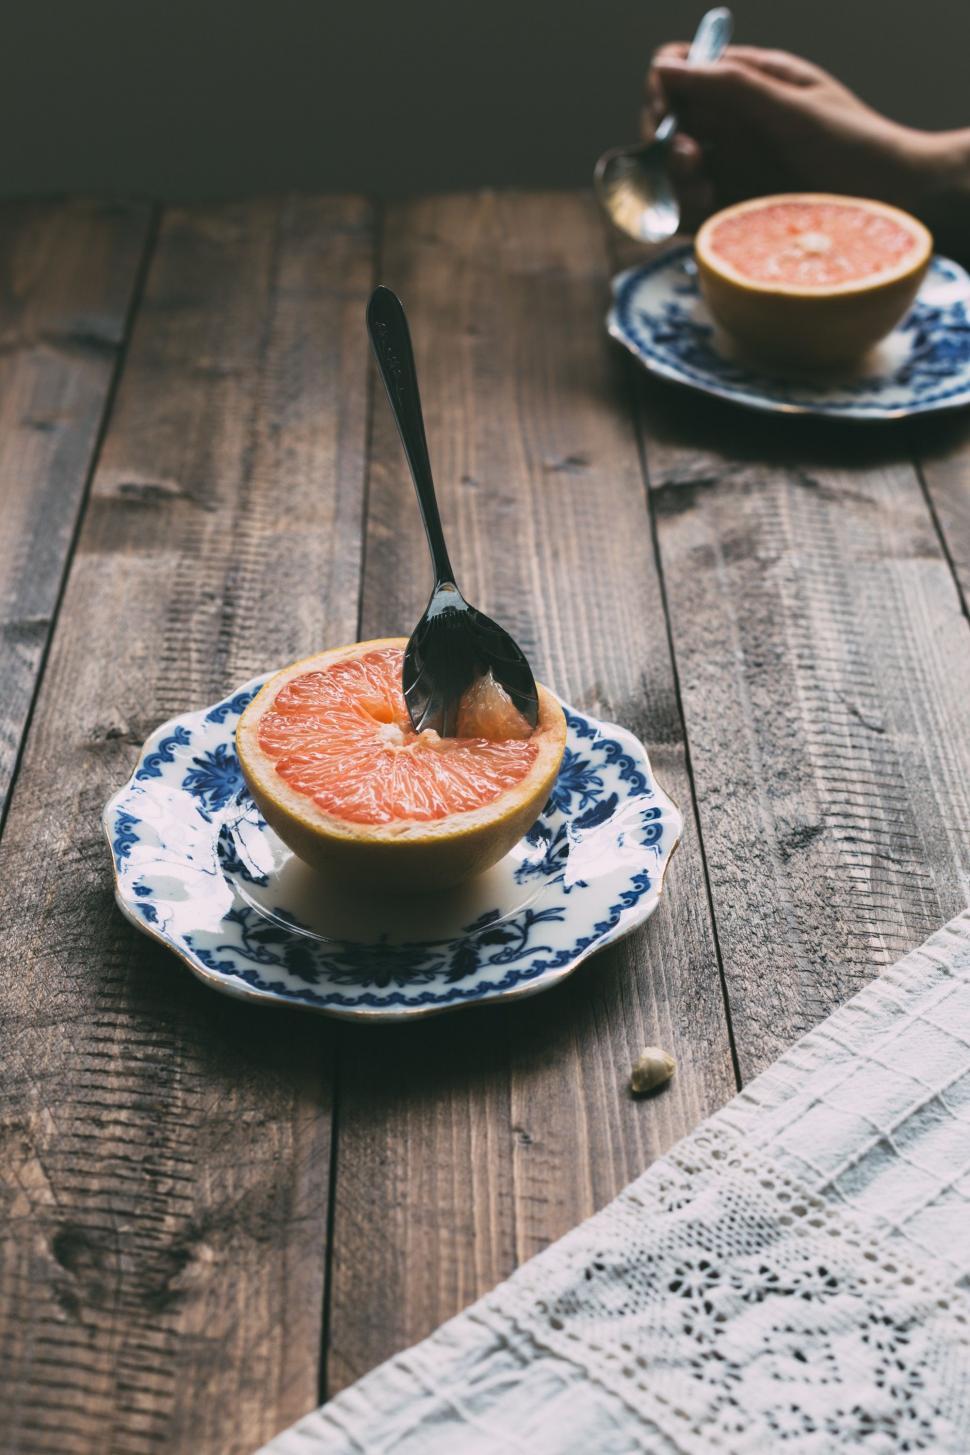 Free Image of Bowl of Blood Oranges on Plate With Spoon 